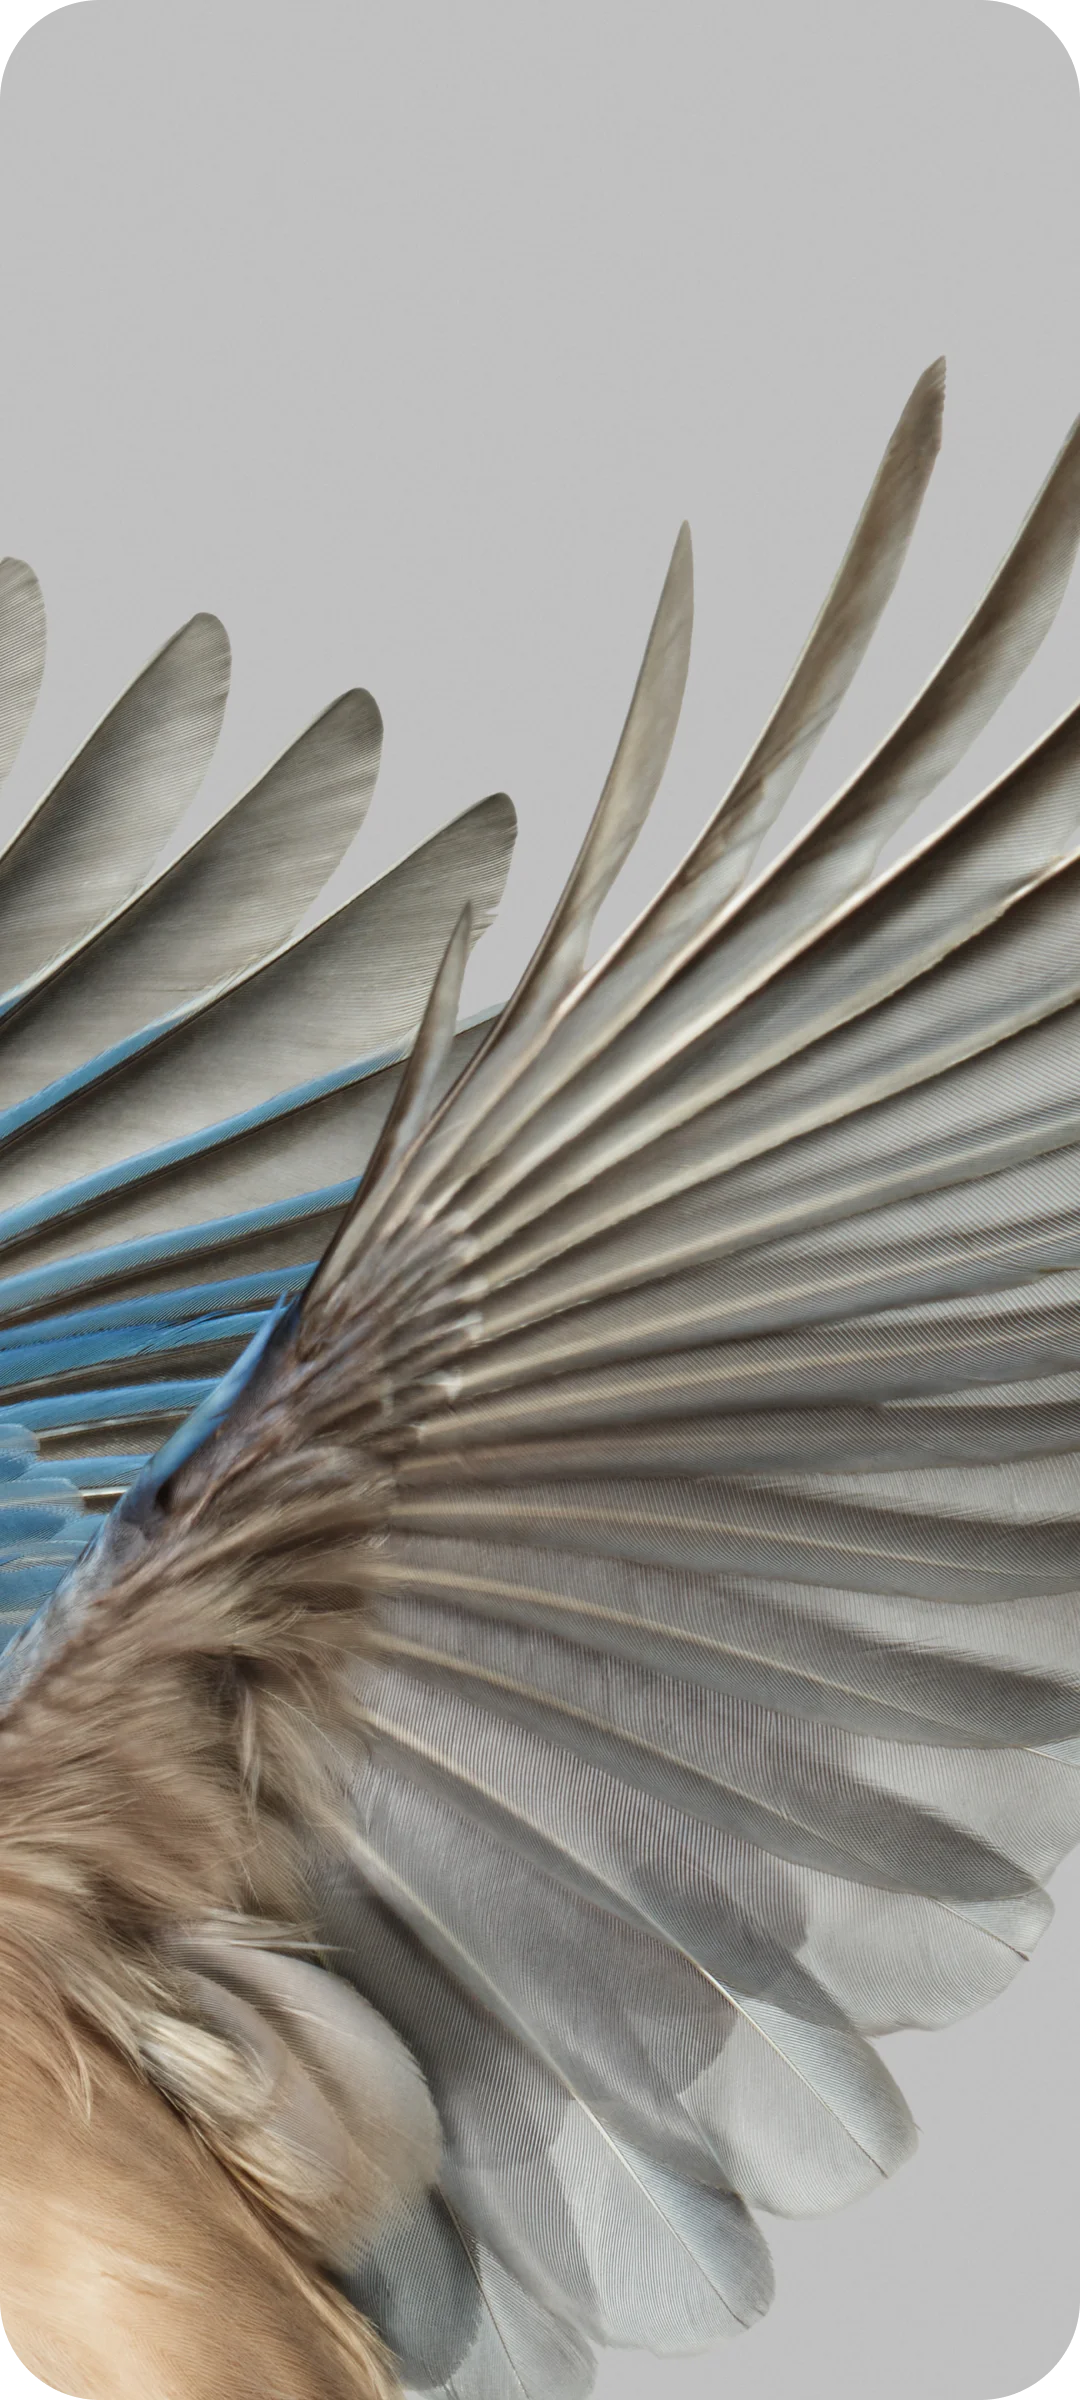 Google's latest wallpaper features a bird's wing. - Wings